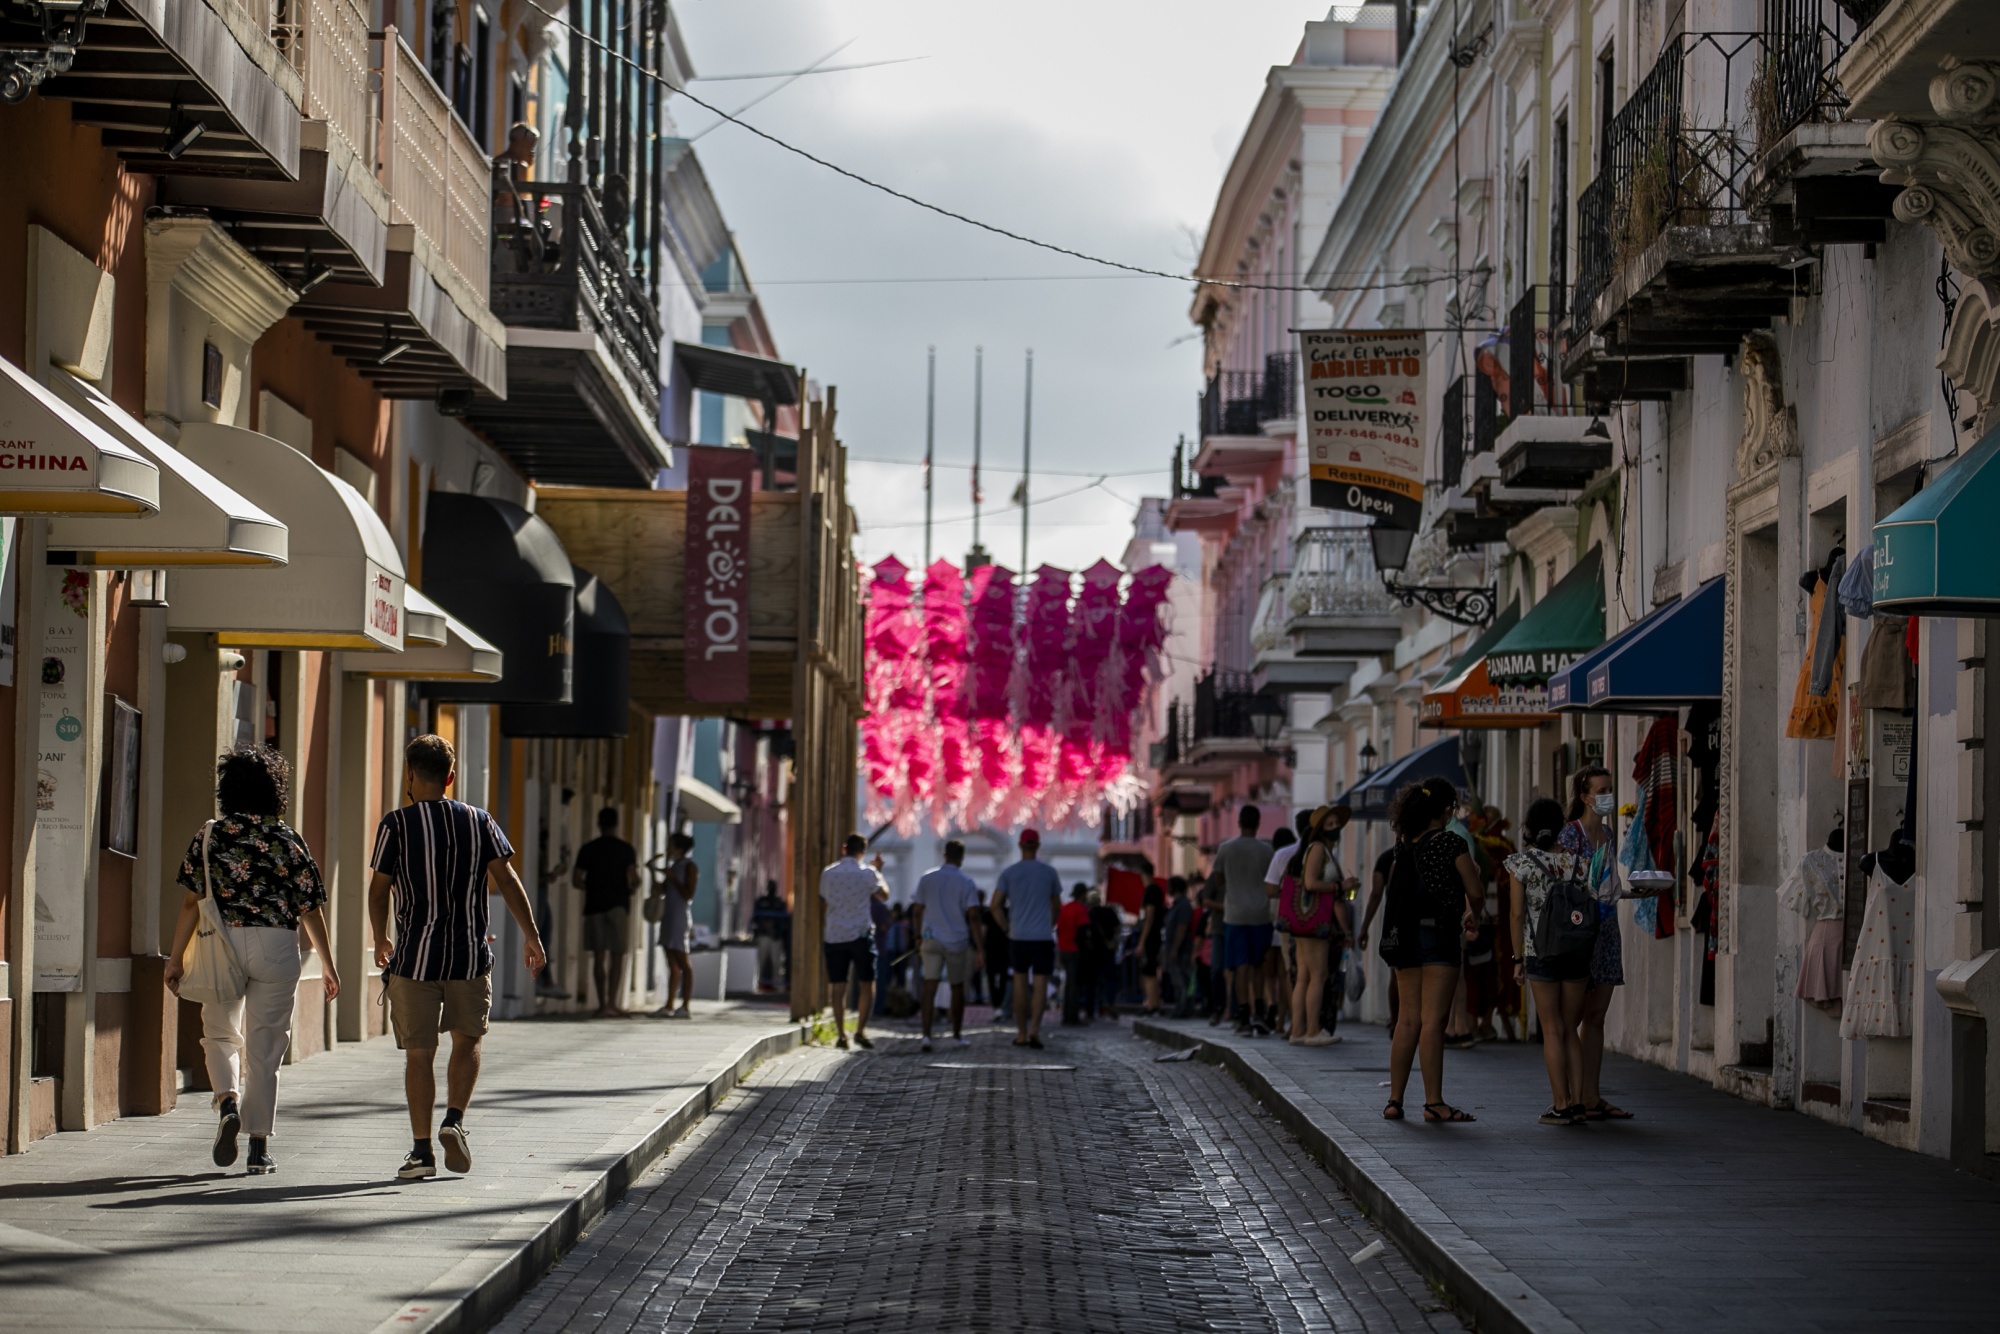 Puerto Rico GDP Increased 0.3 in 2019, BEA Report Finds Bloomberg